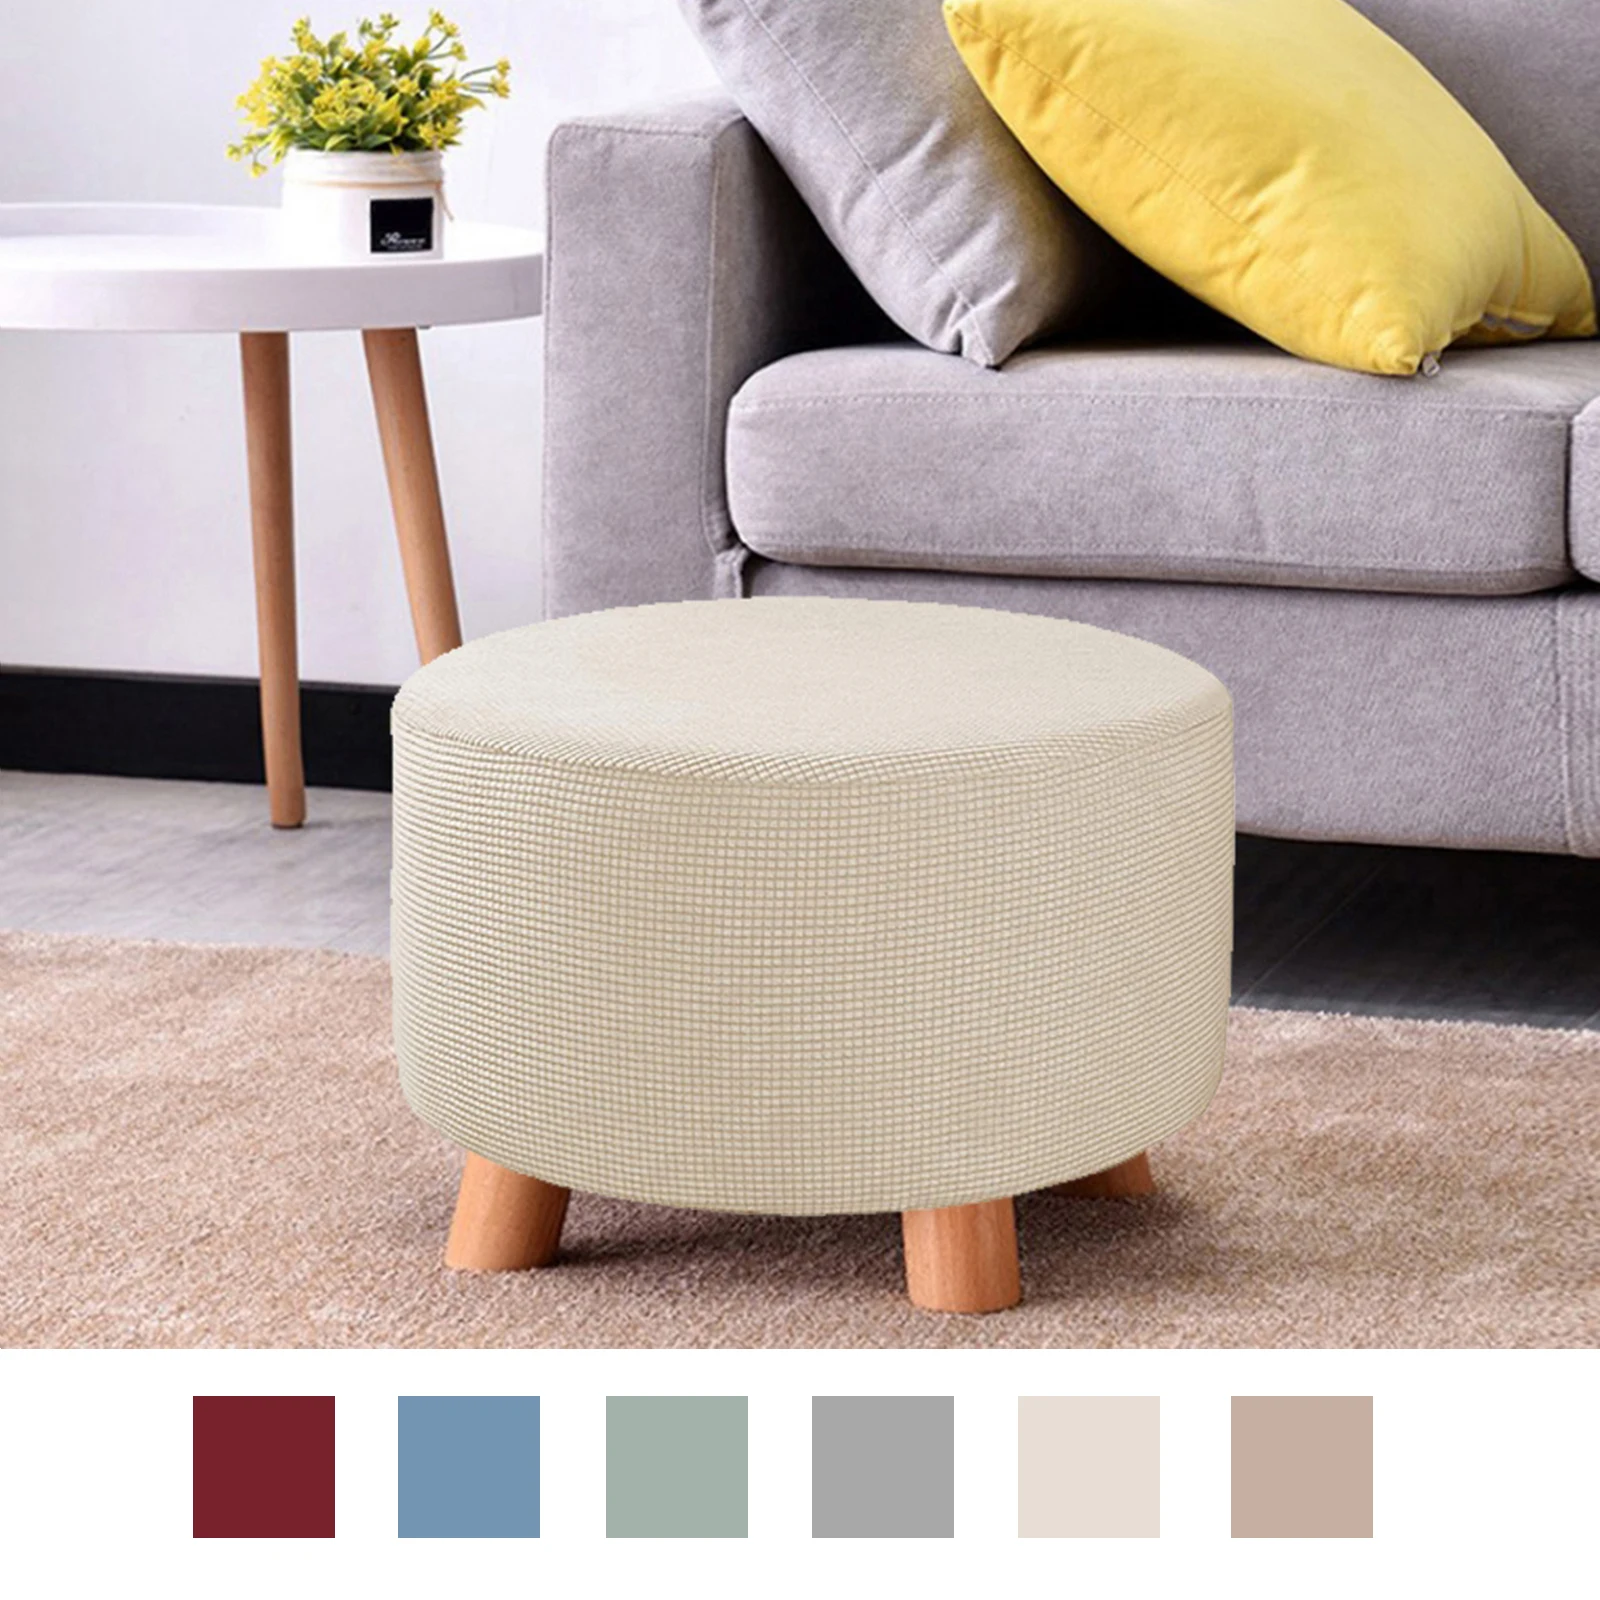 Foot Rest Ottoman Cover Storage Stool Slipcover Elastic Furniture Protector 